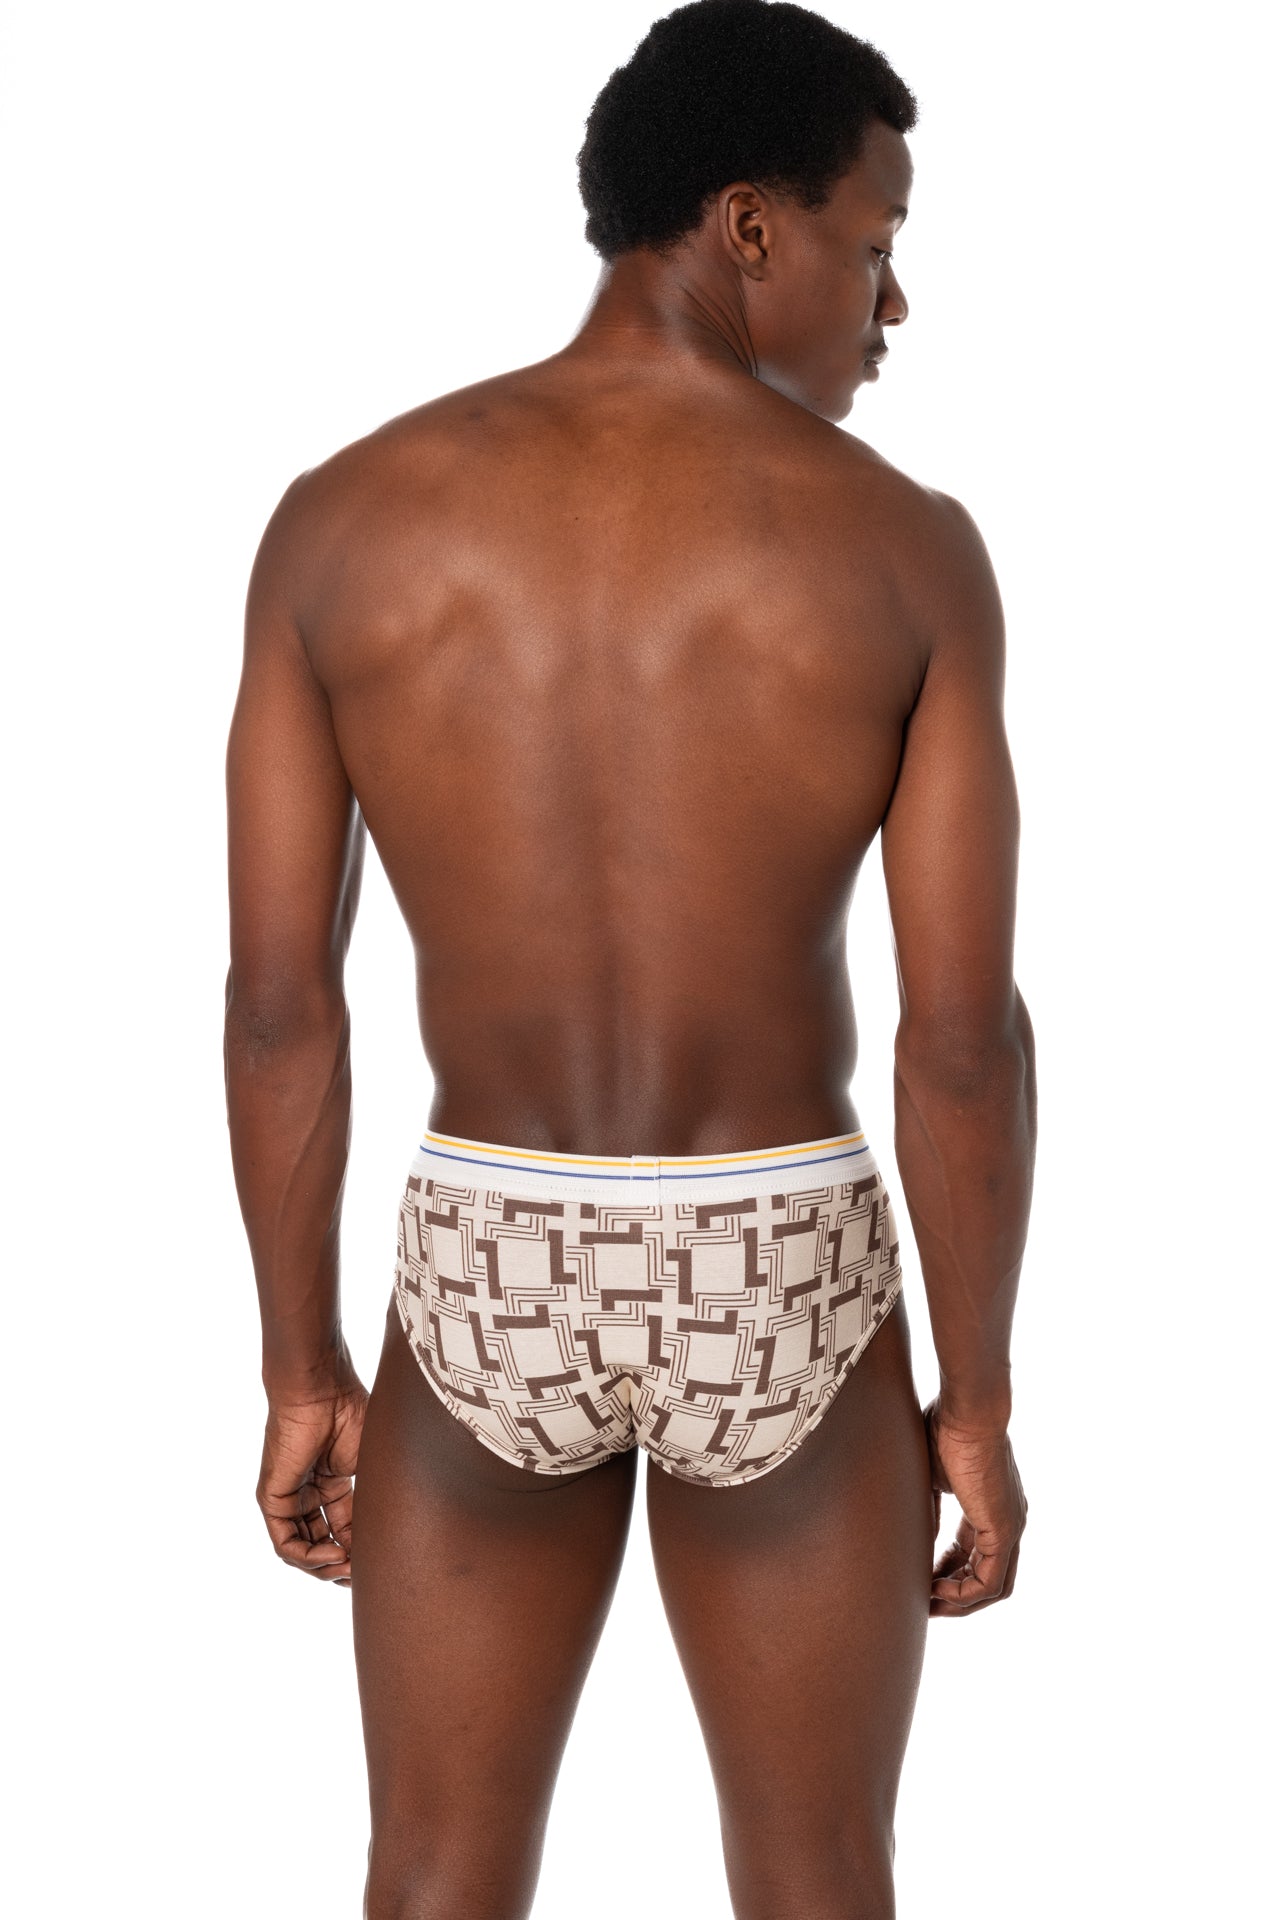 RTS EXECUTIVE COTTON LOW-RIDER BILLY BRIEF